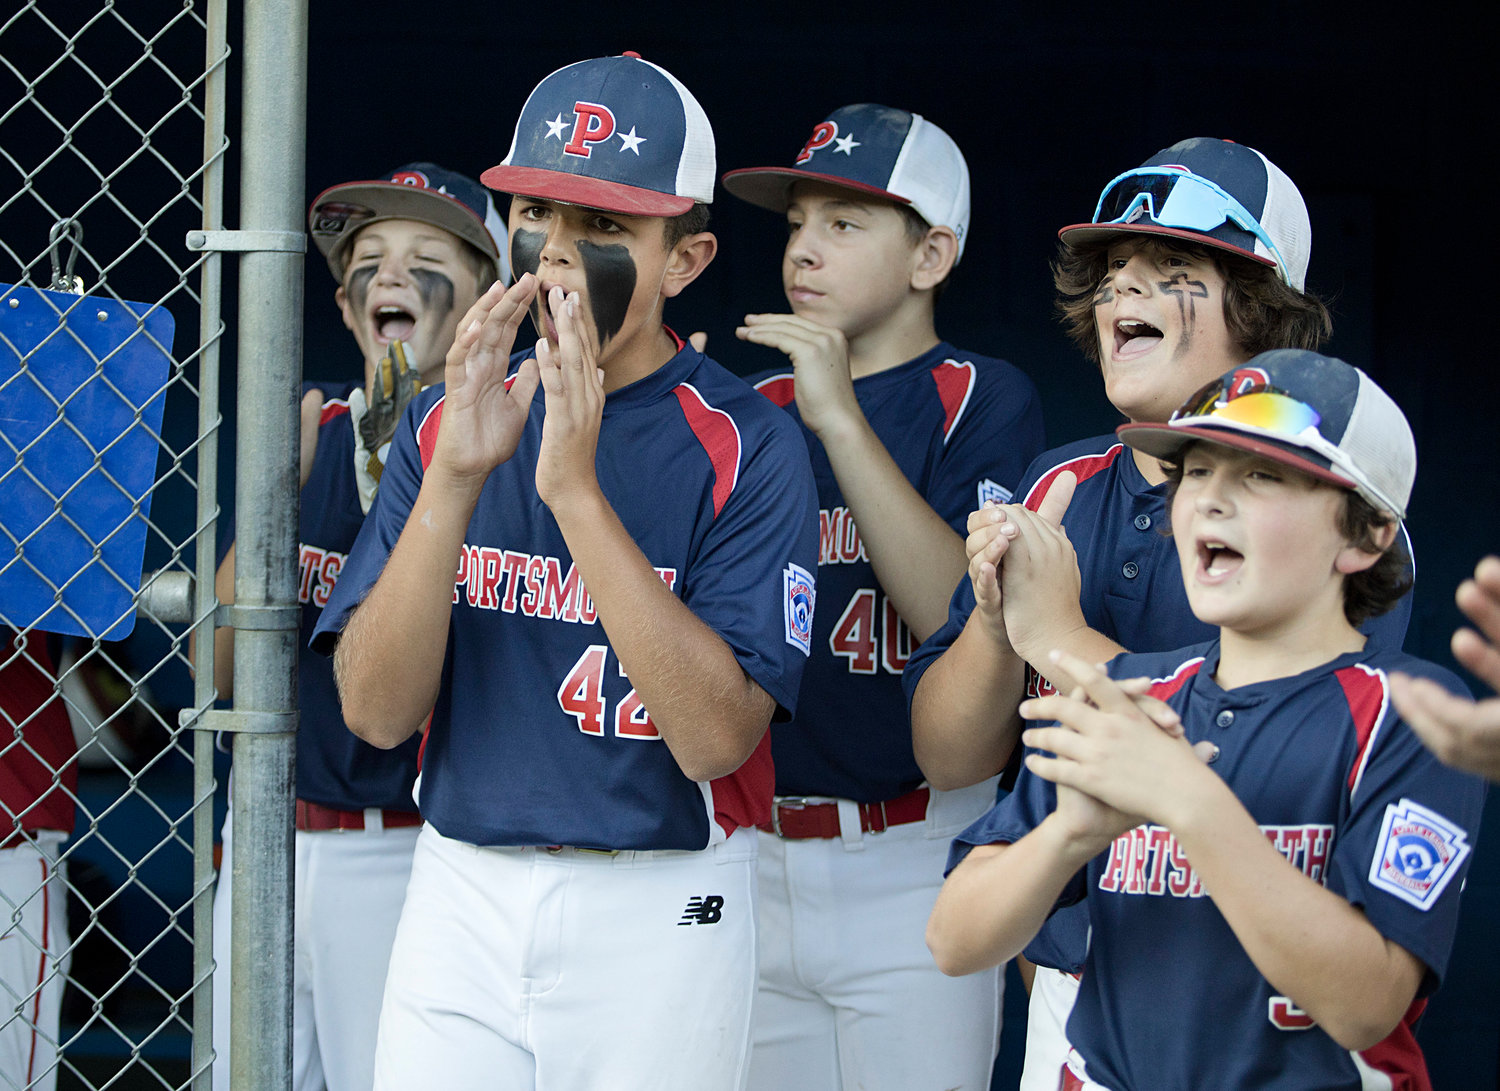 Portsmouth players amp each other up in the dugout before the start of the state championship game against Cumberland.